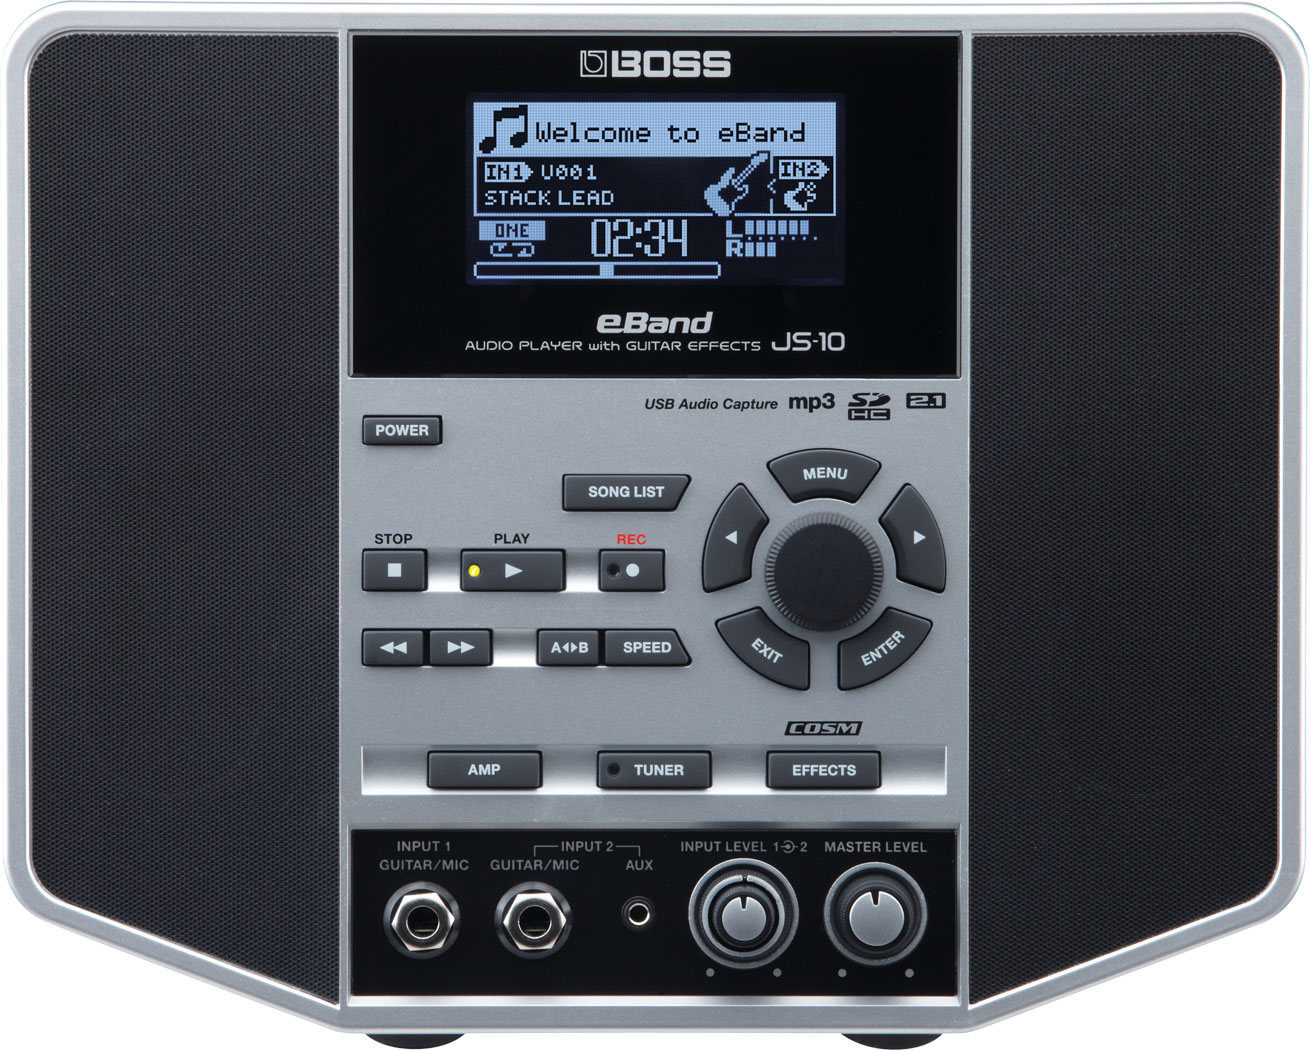 BOSS - eBand JS-10 | AUDIO PLAYER with GUITAR EFFECTS